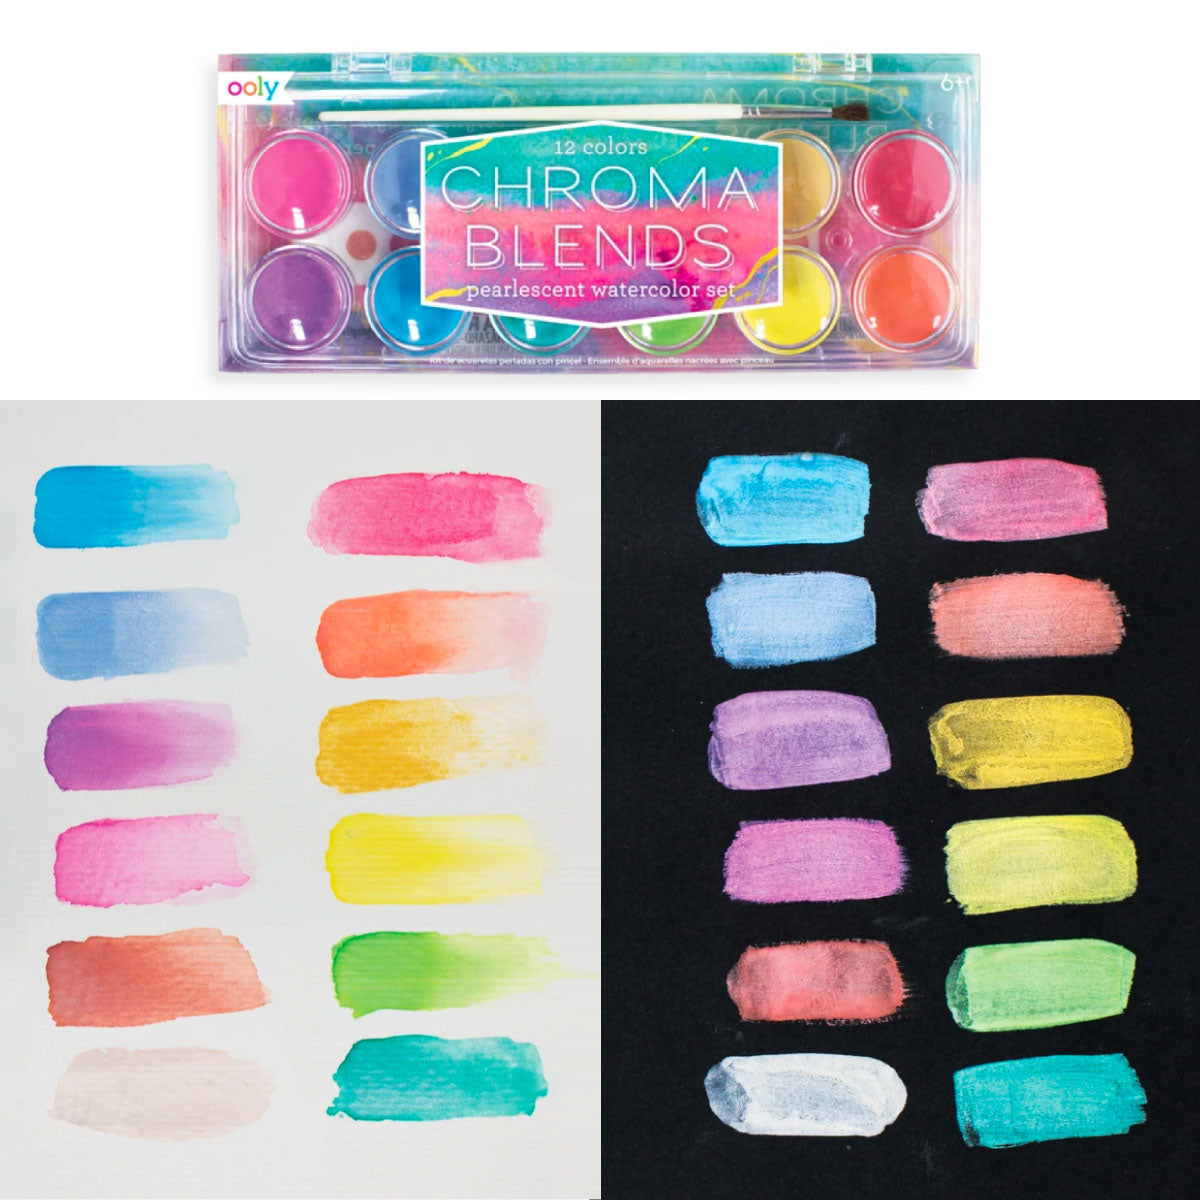 Chroma Blends Pearlescent Watercolor Paint – MOCA Store